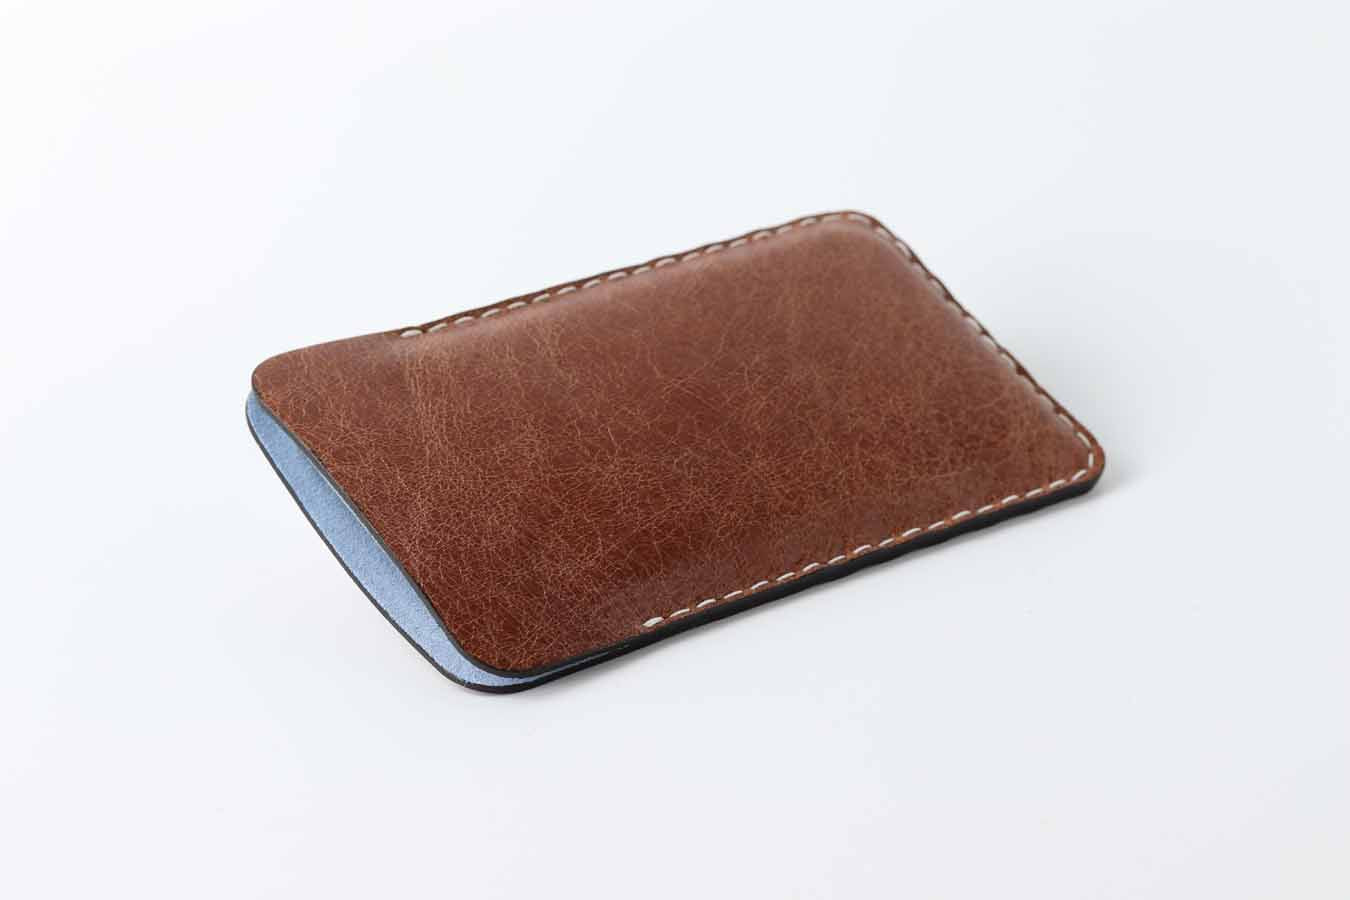 Brown leather iPhone sleeve for protection  with  soft lining inside